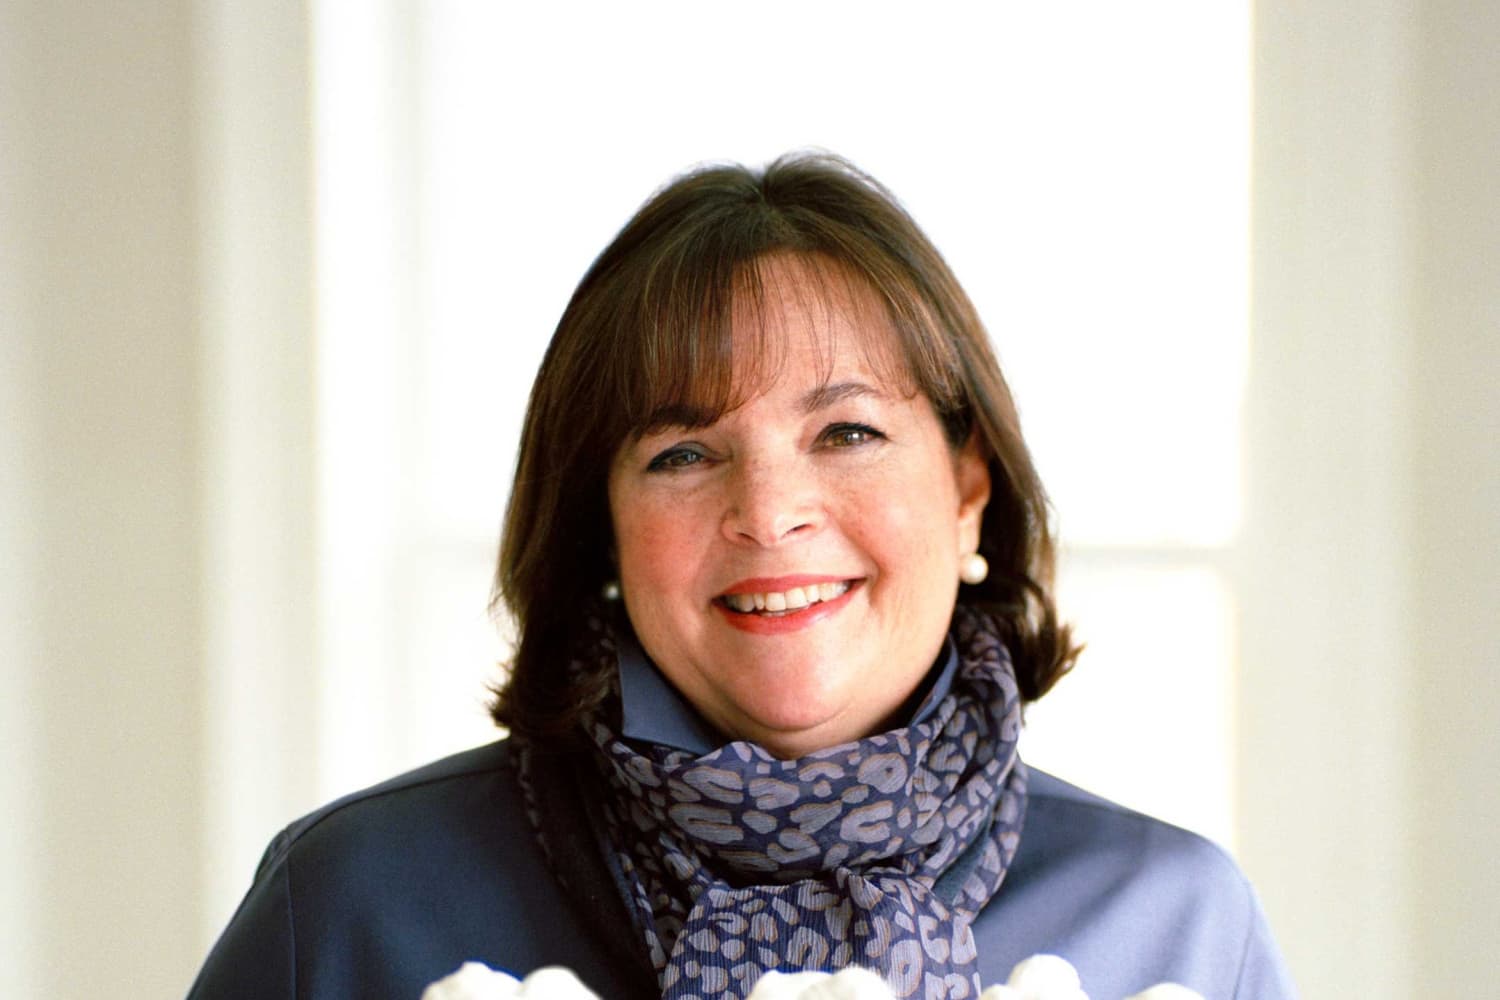 The Practical Tips I’ve Learned from Watching Ina Garten at the Gym ...